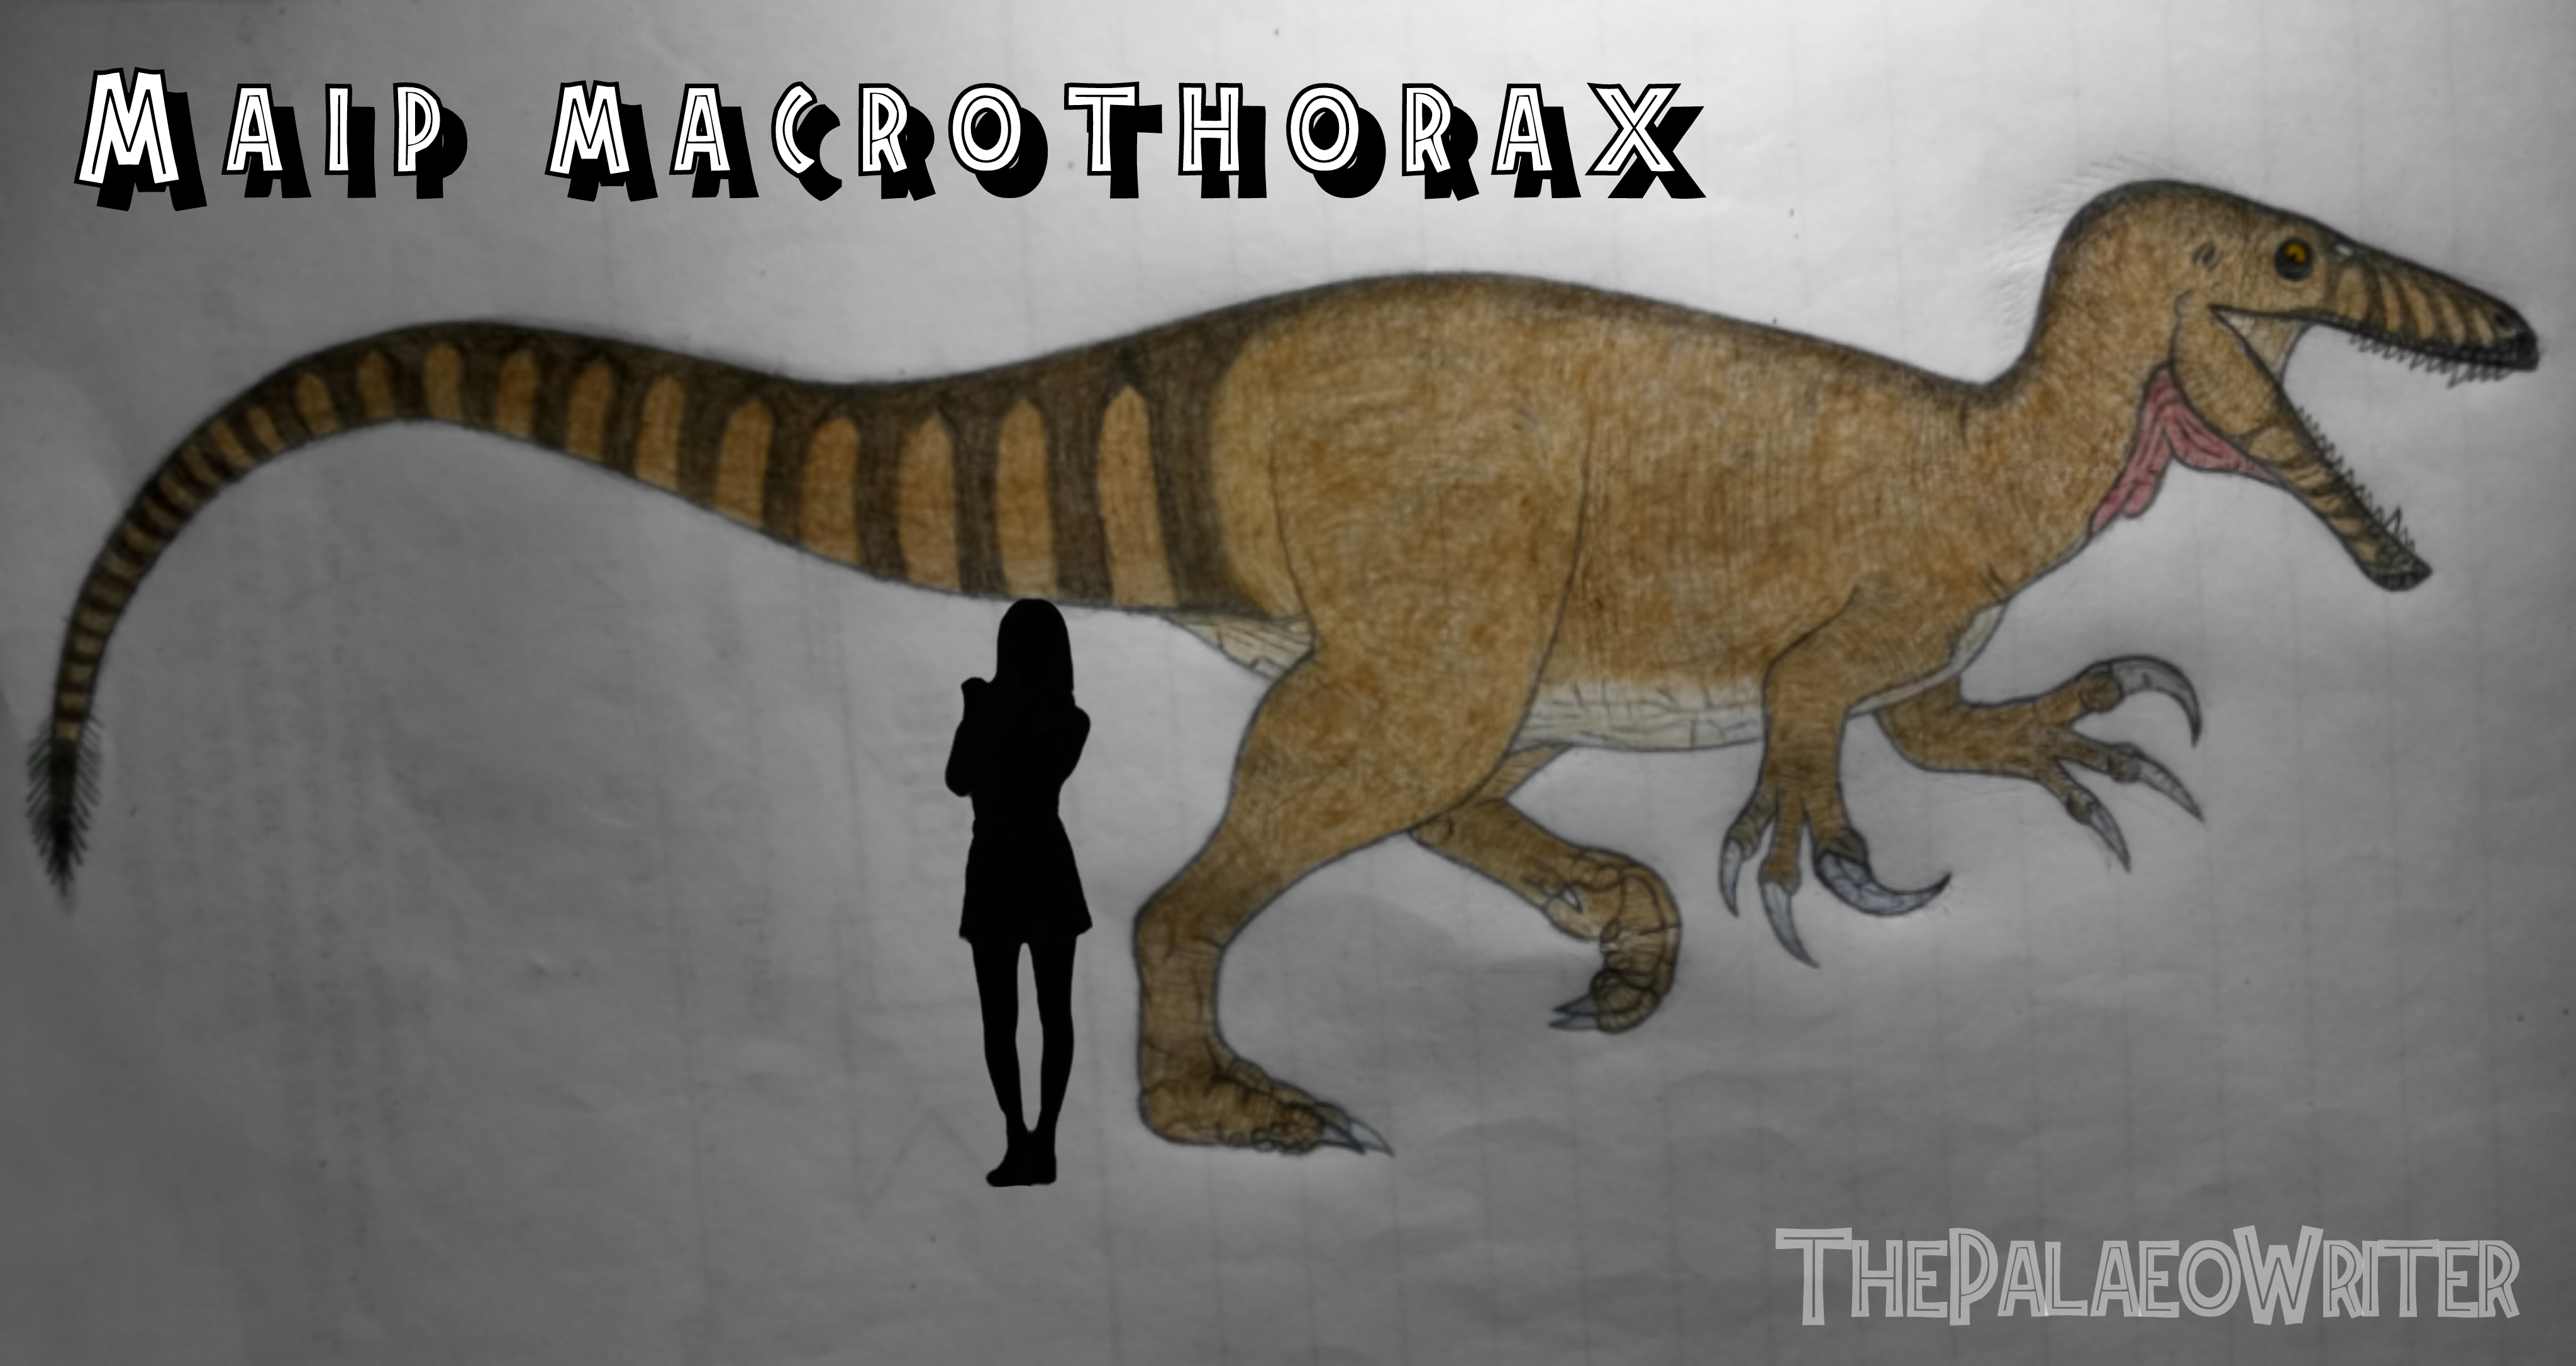 Maip macrothorax by ThePalaeoWriter by ThePalaeoWriter on DeviantArt